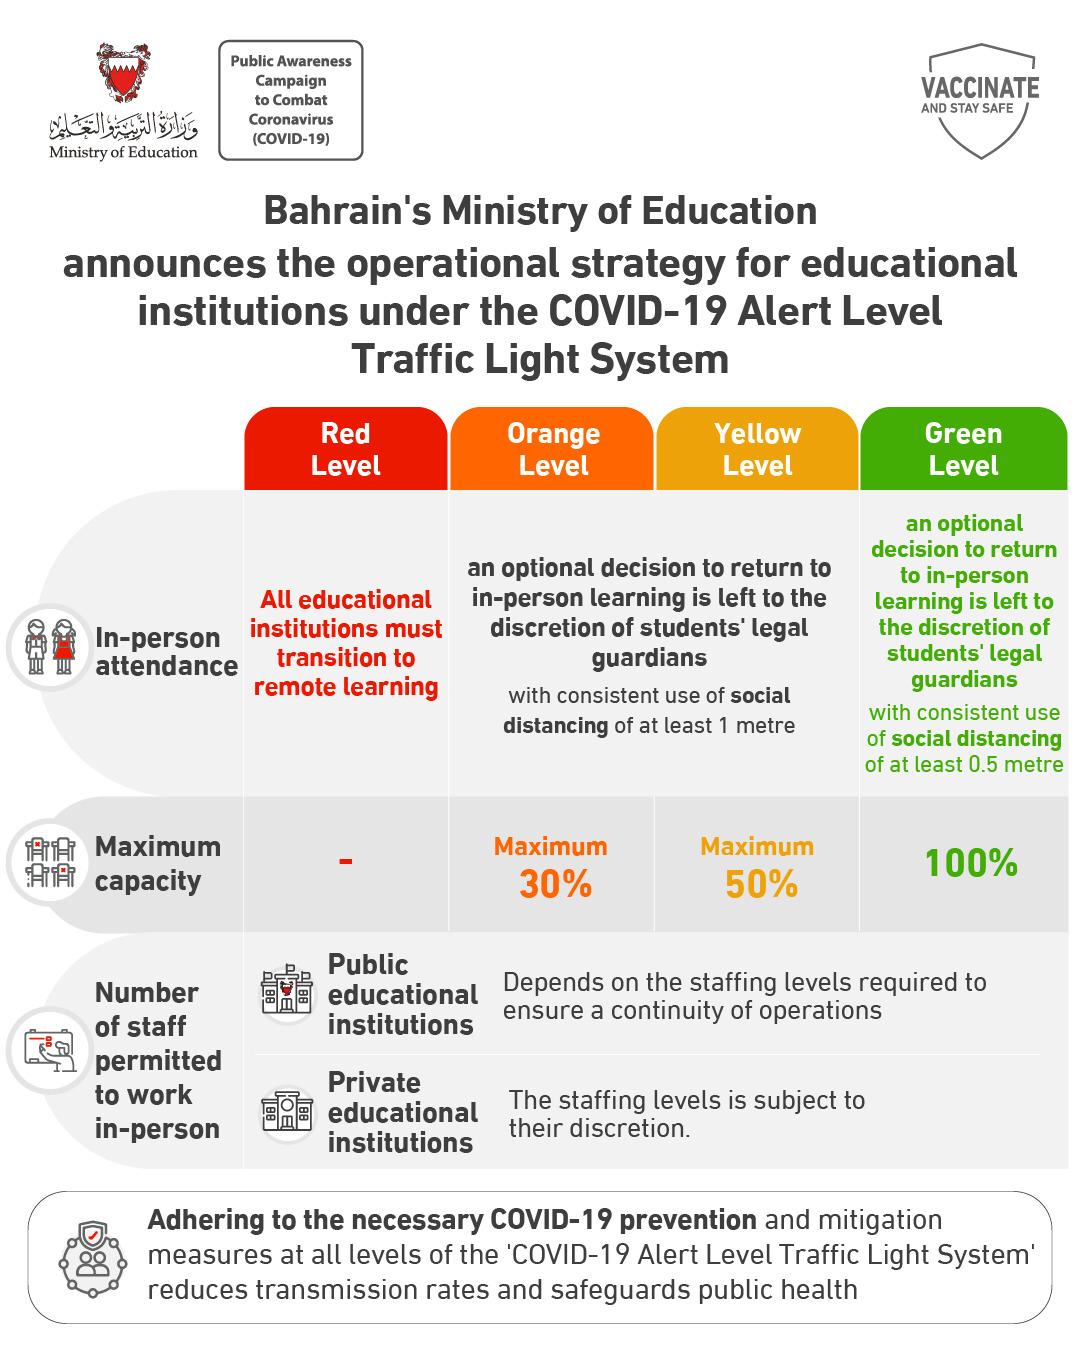 Bahrain's Ministry of Education announces the operational strategy for educational institutions under the COVID-19 Alert Level Traffic Light System